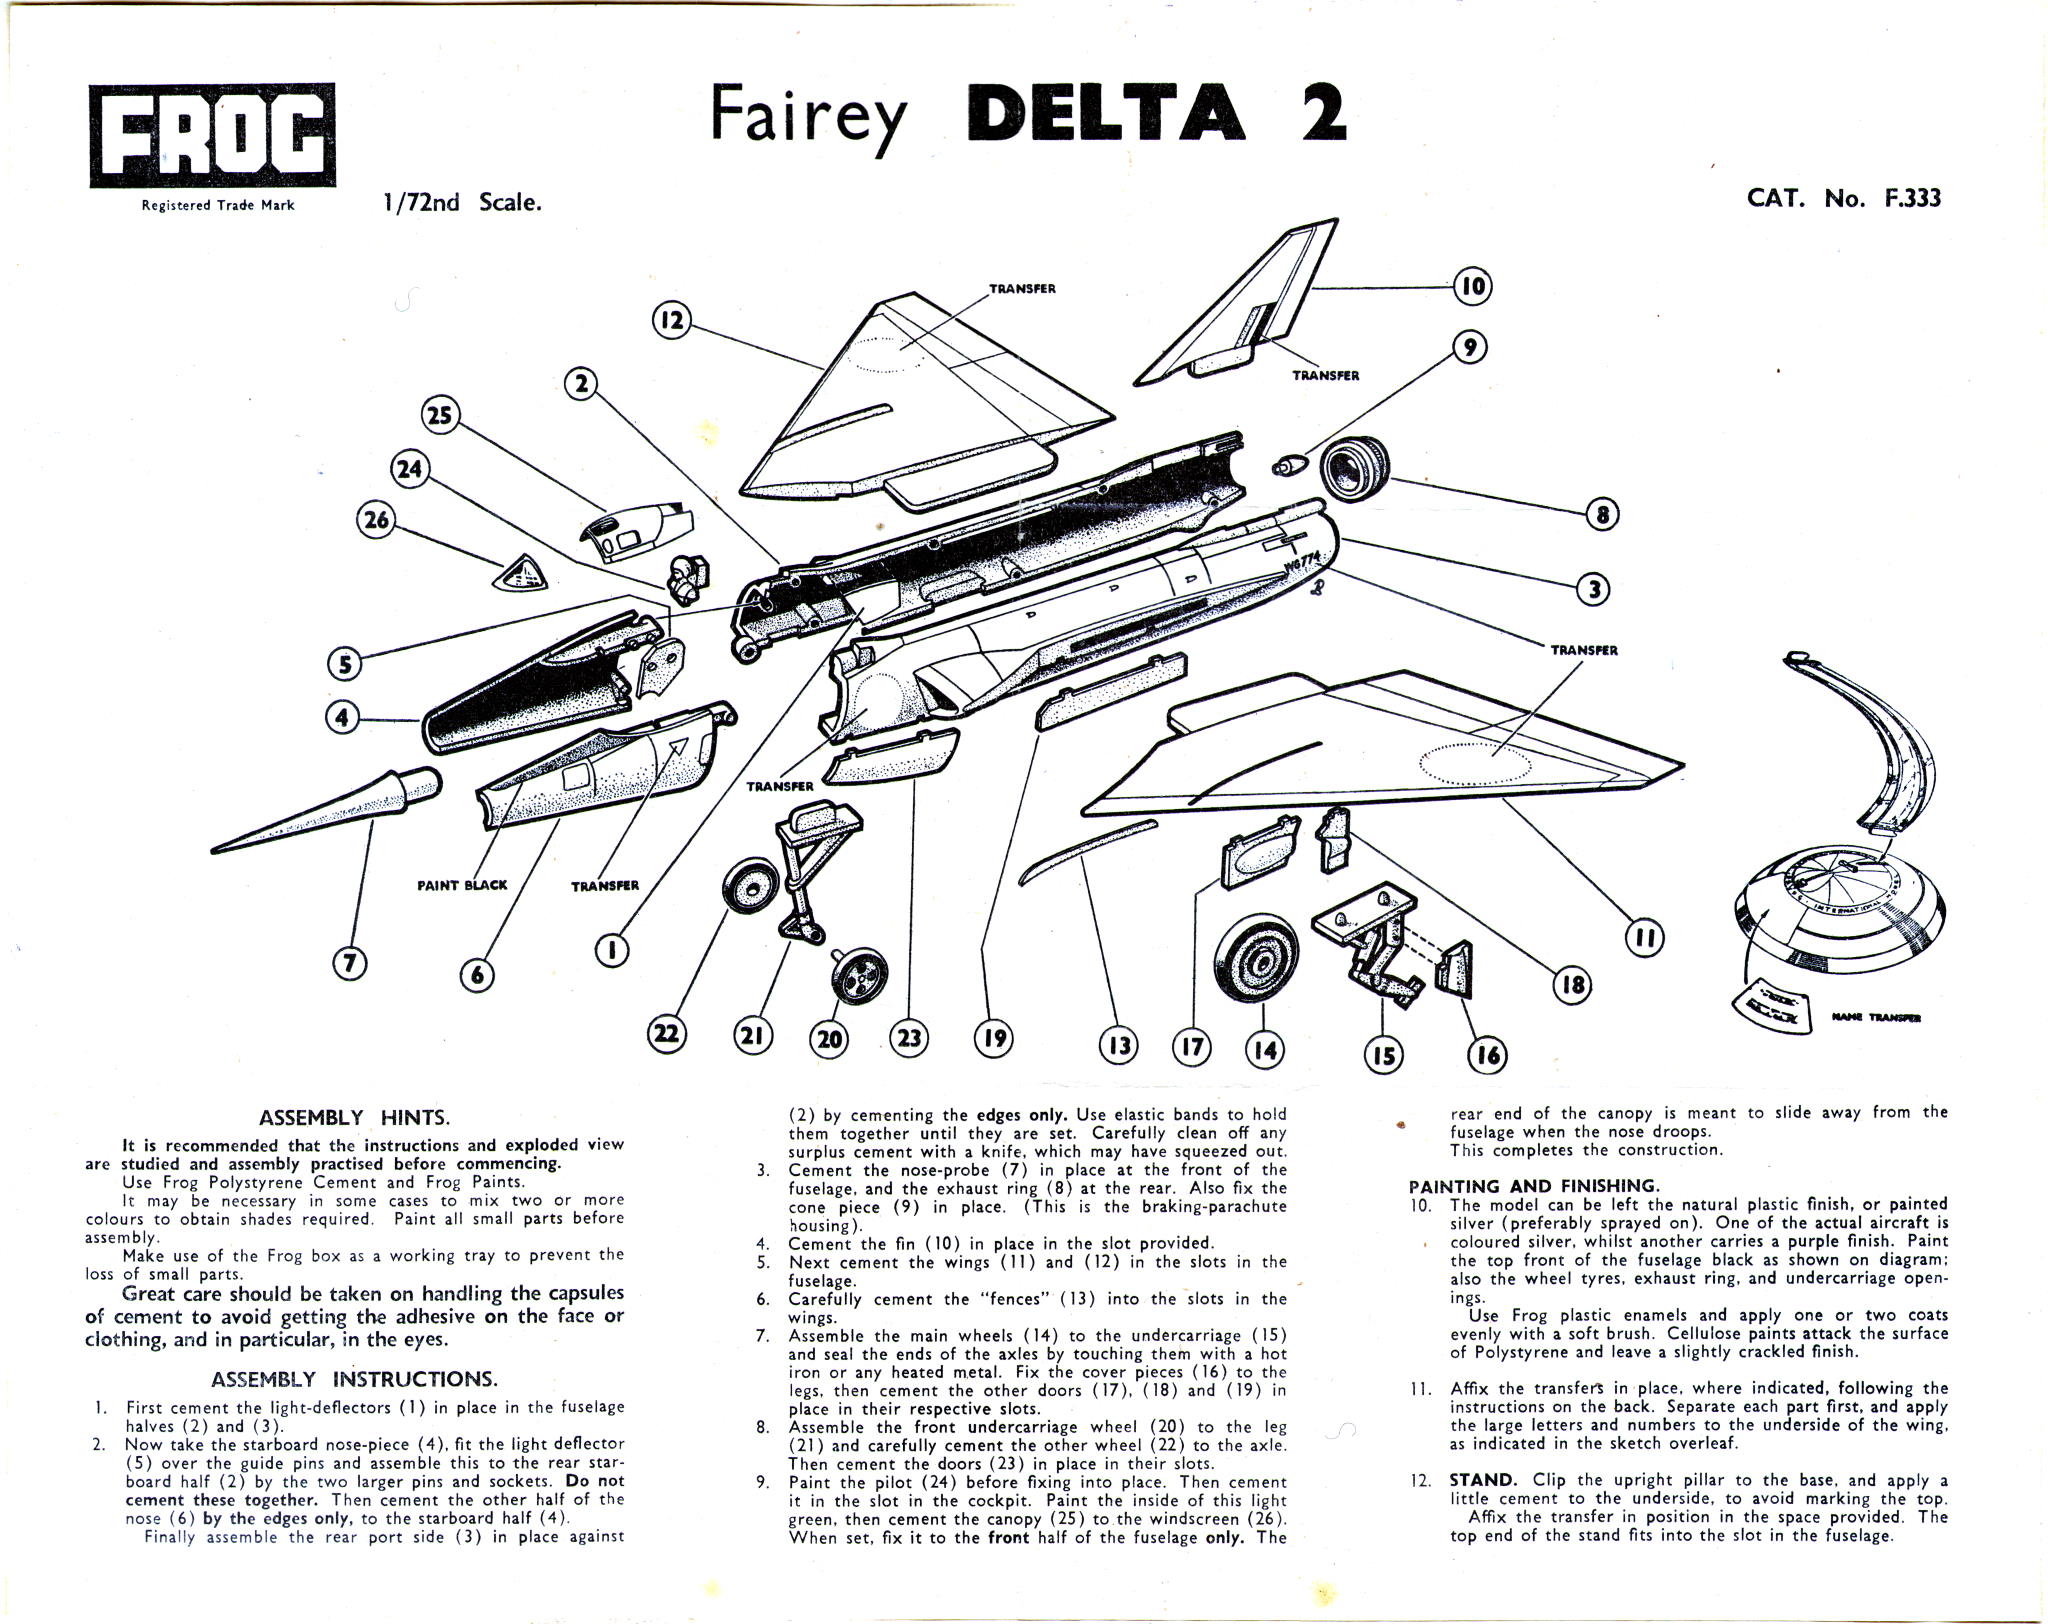  Коробка FROG F333 Fairey Delta - Research Aircraft with Gold Tokens, IMA, 1965-66